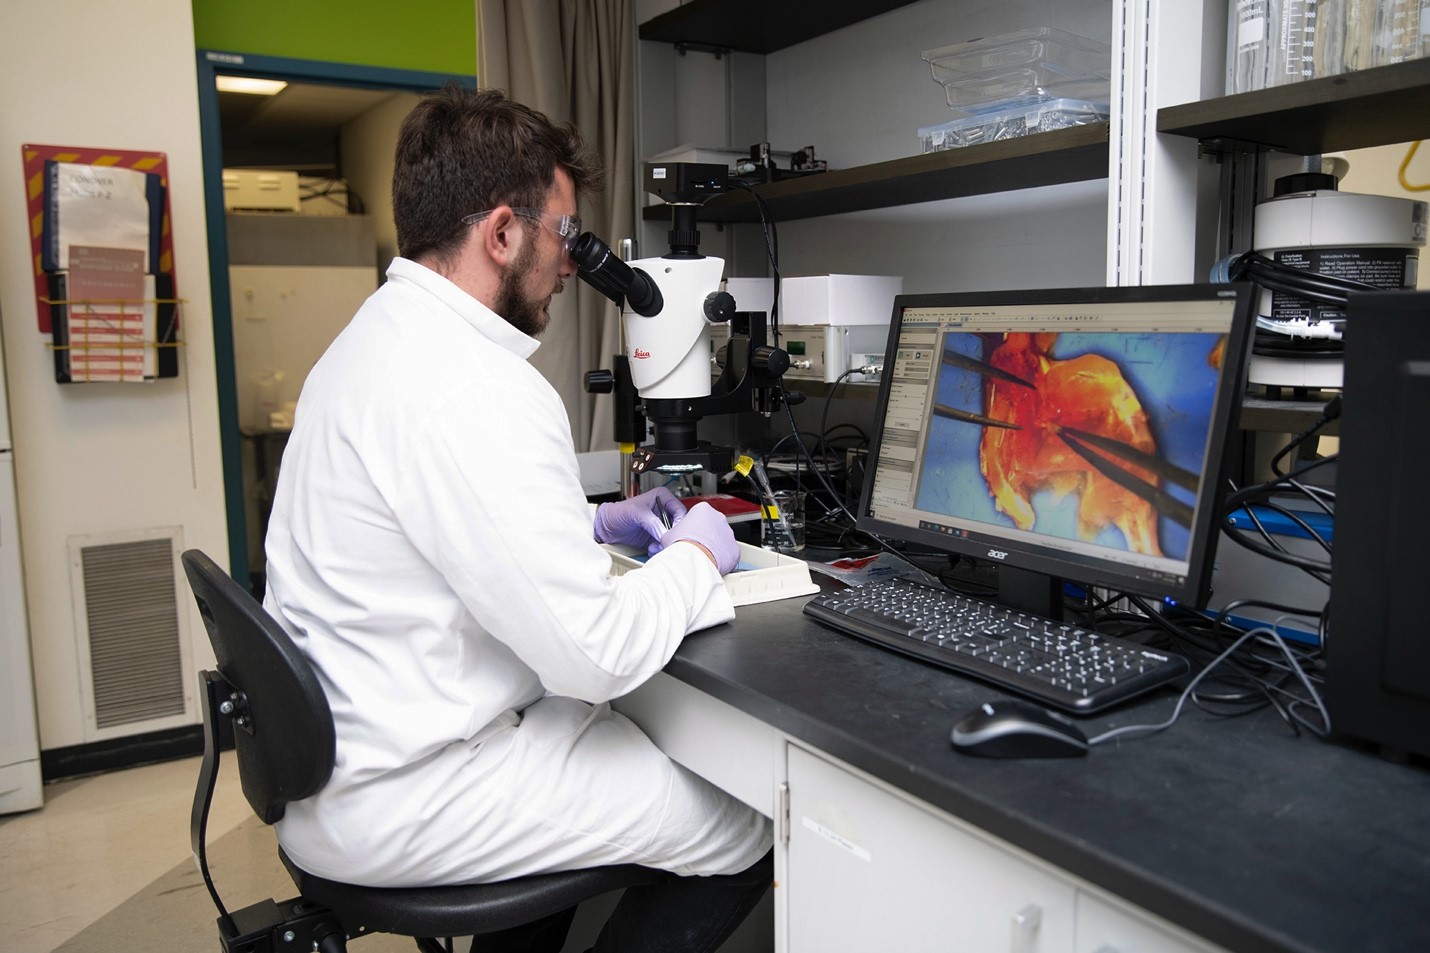 man sits looking into a microscope while image of muscle tissue and tweezers is projected on computer screen